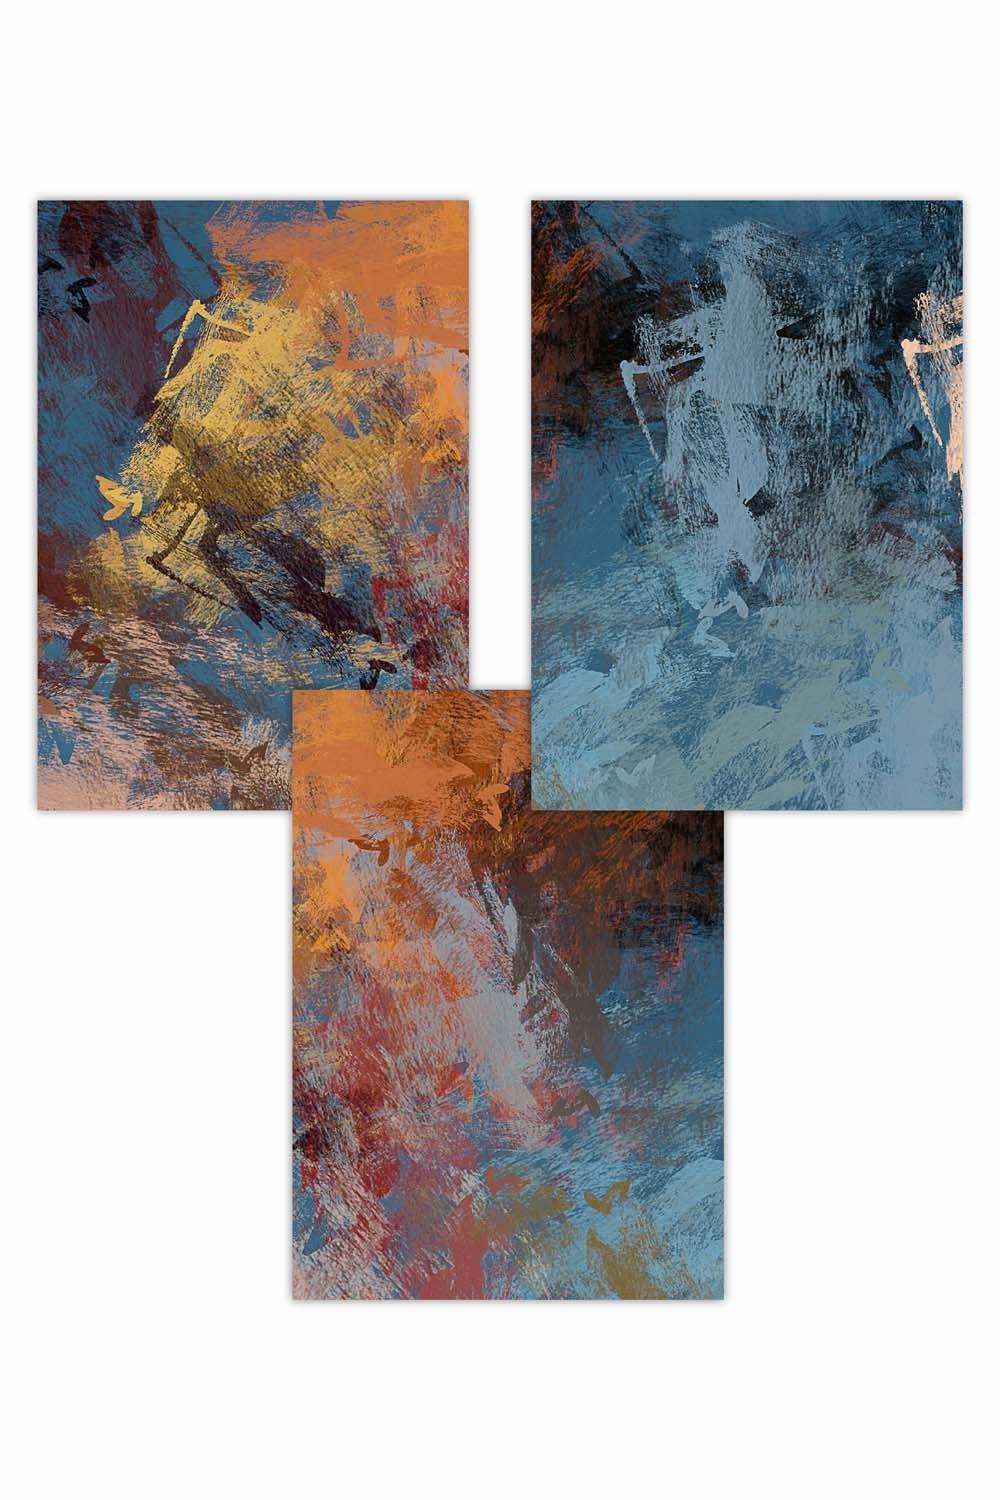 Set of 3 Abstract Orange Blue Cerulean Dream Art Posters